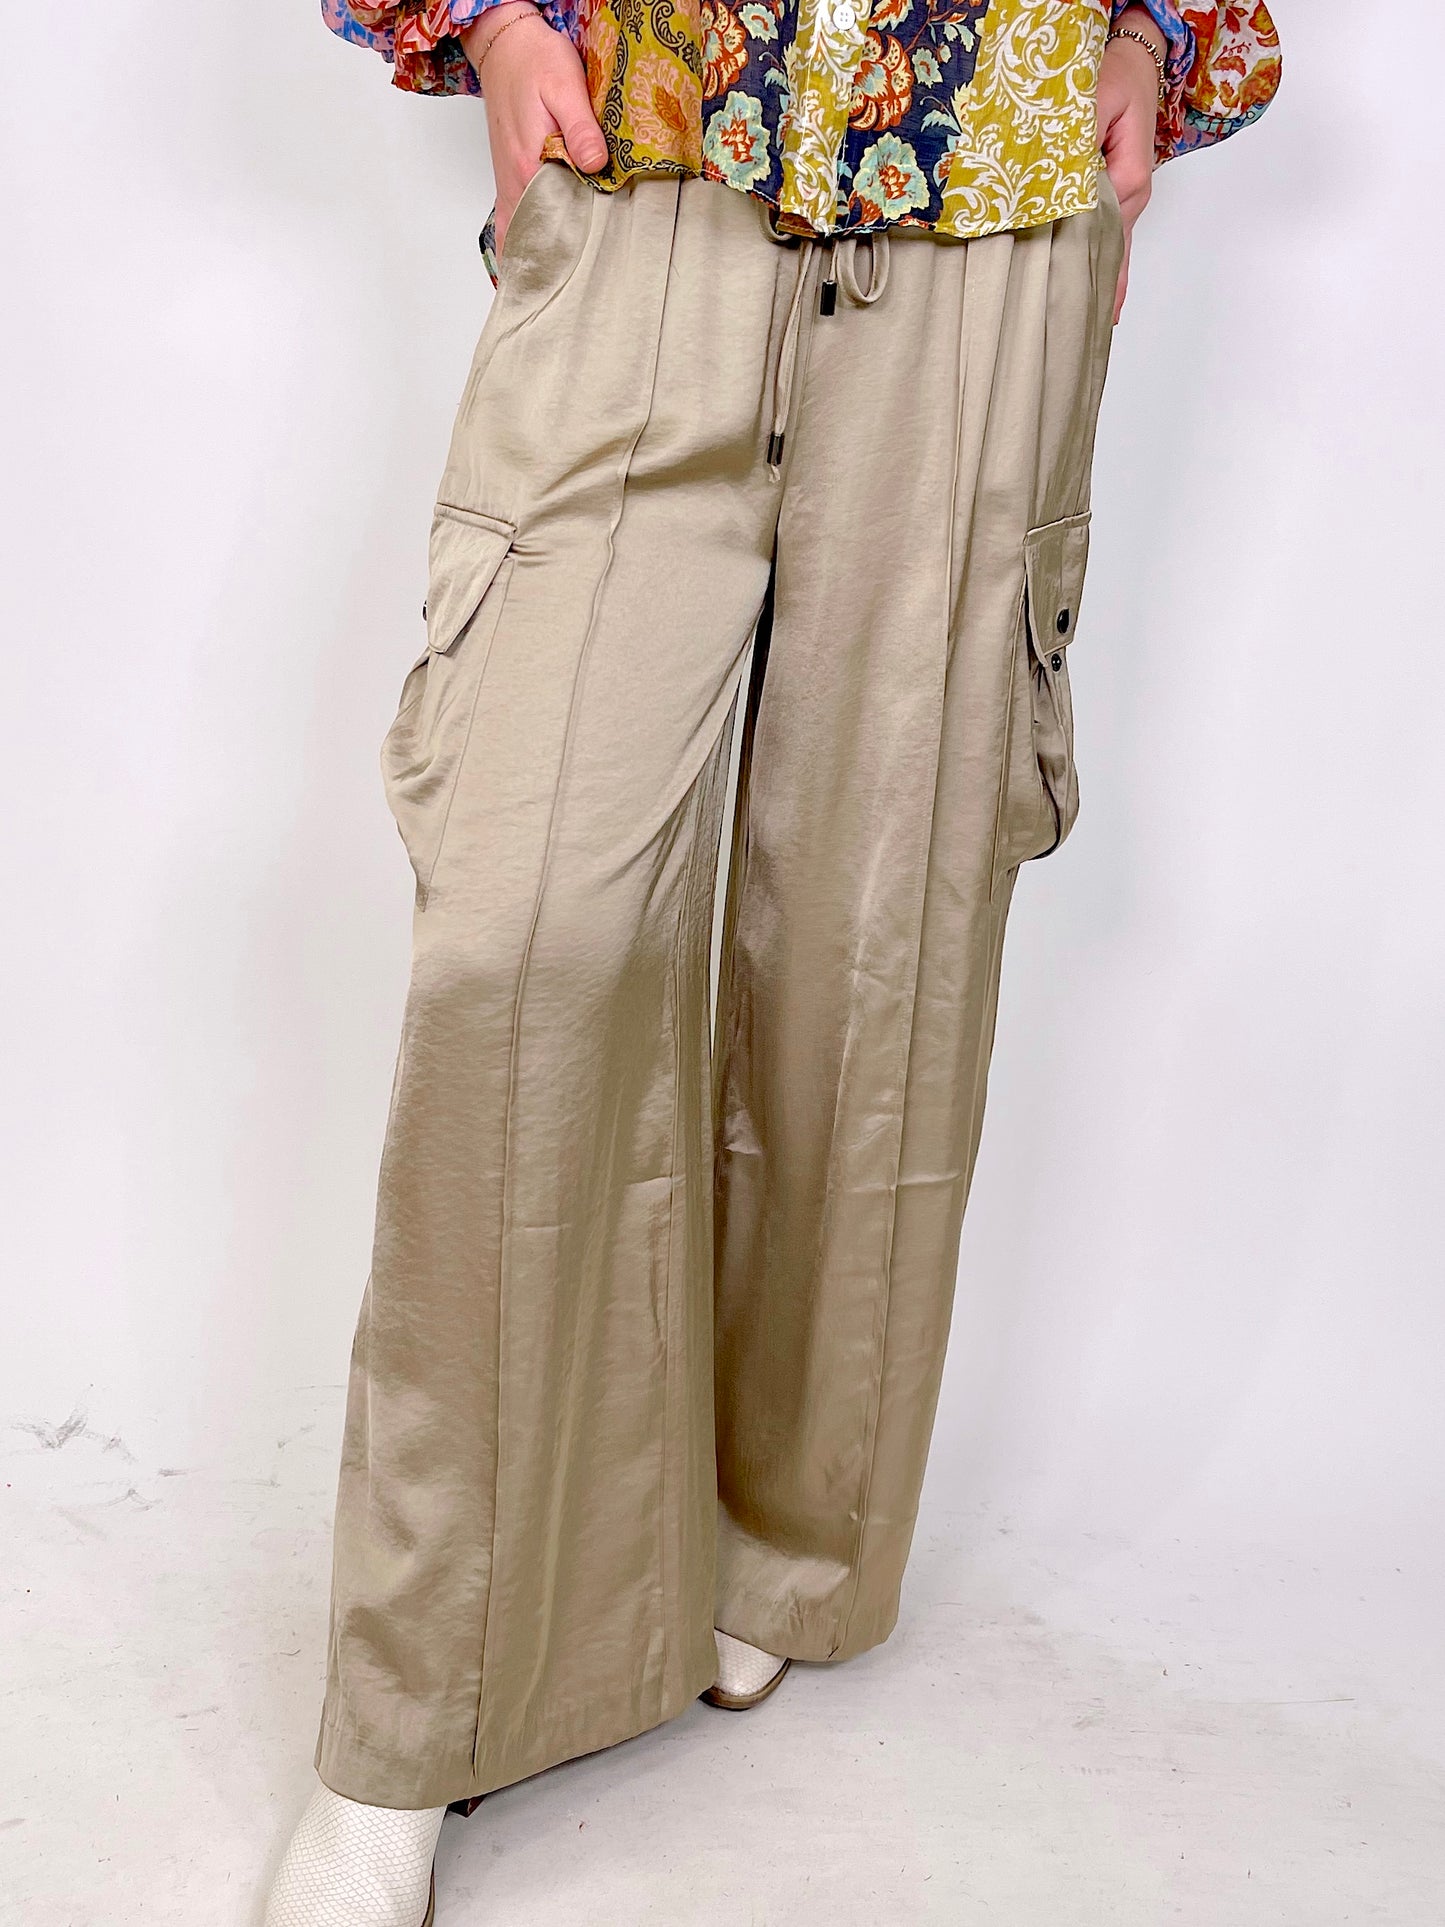 The Heather Satin Pants-Satin Pants-Easel-The Village Shoppe, Women’s Fashion Boutique, Shop Online and In Store - Located in Muscle Shoals, AL.